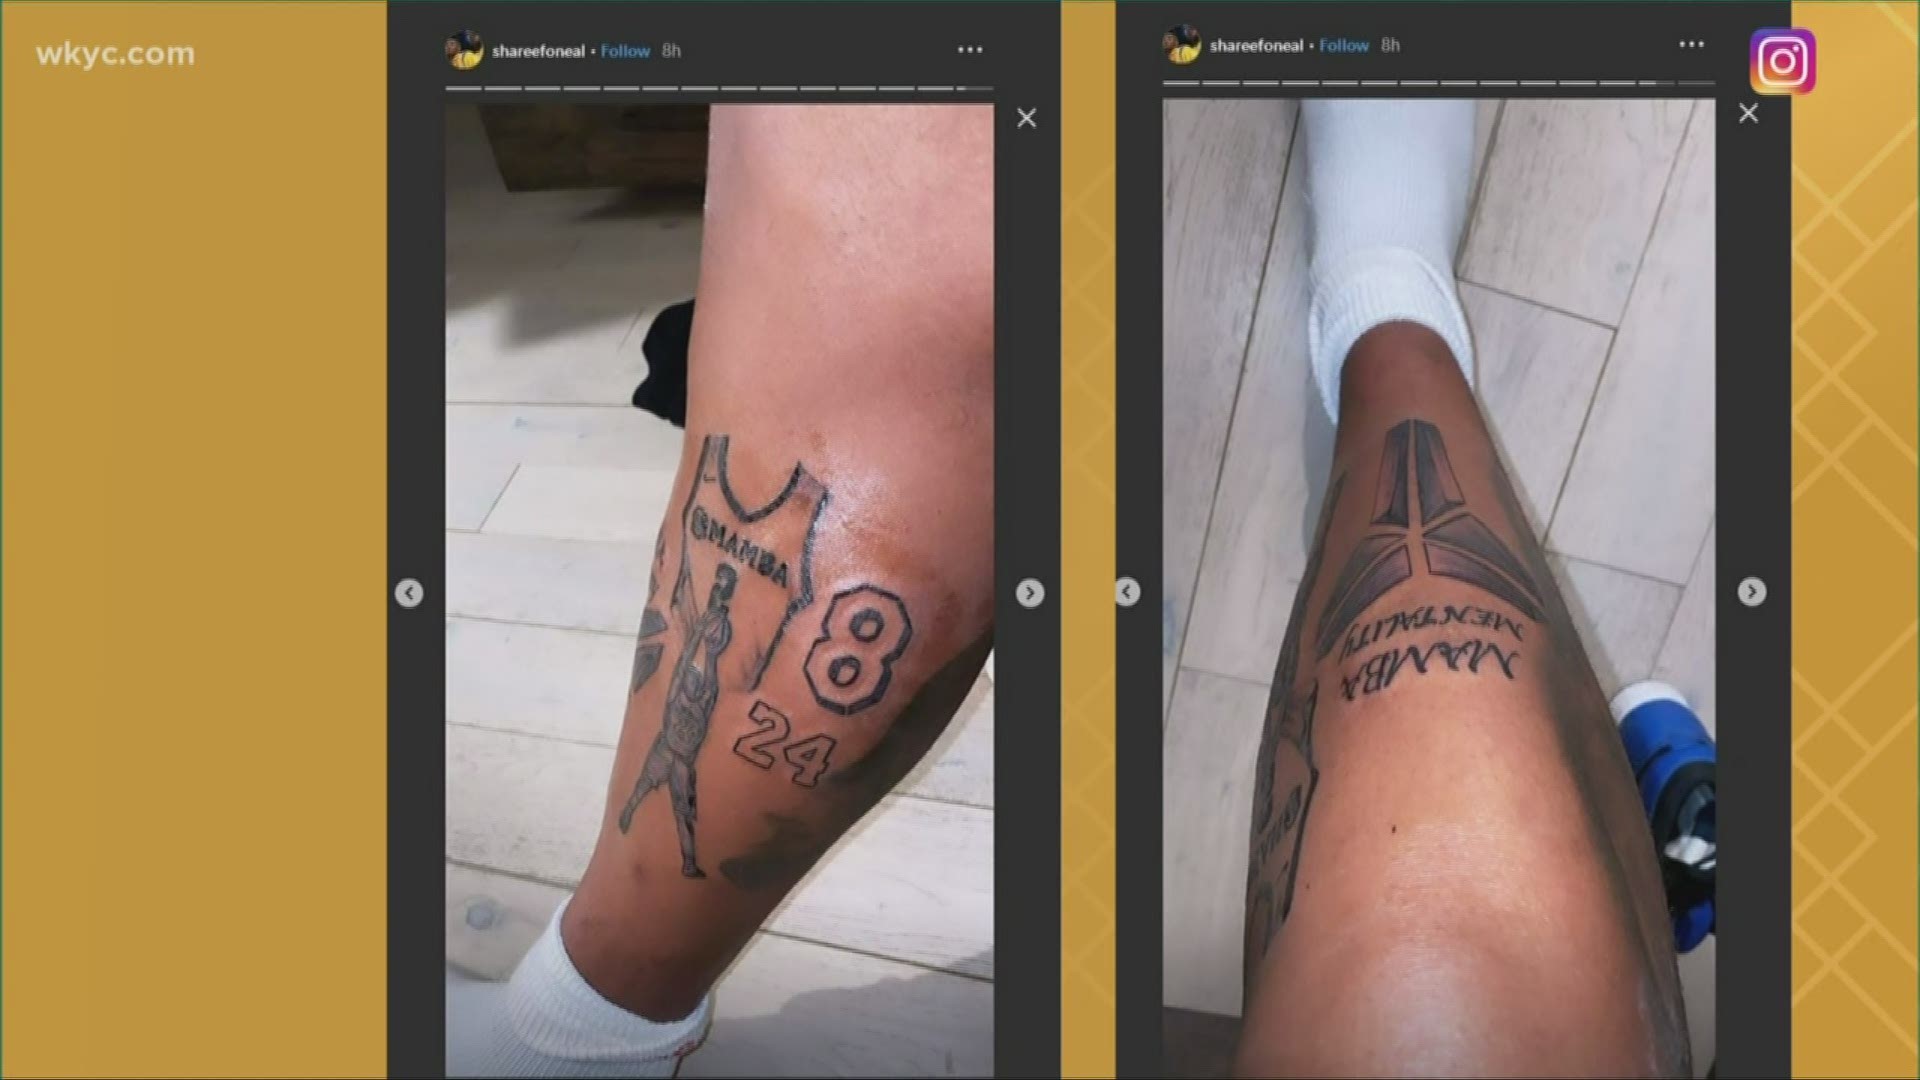 Kobe and Gianna Bryant honored with tattoos by Shaq's son 